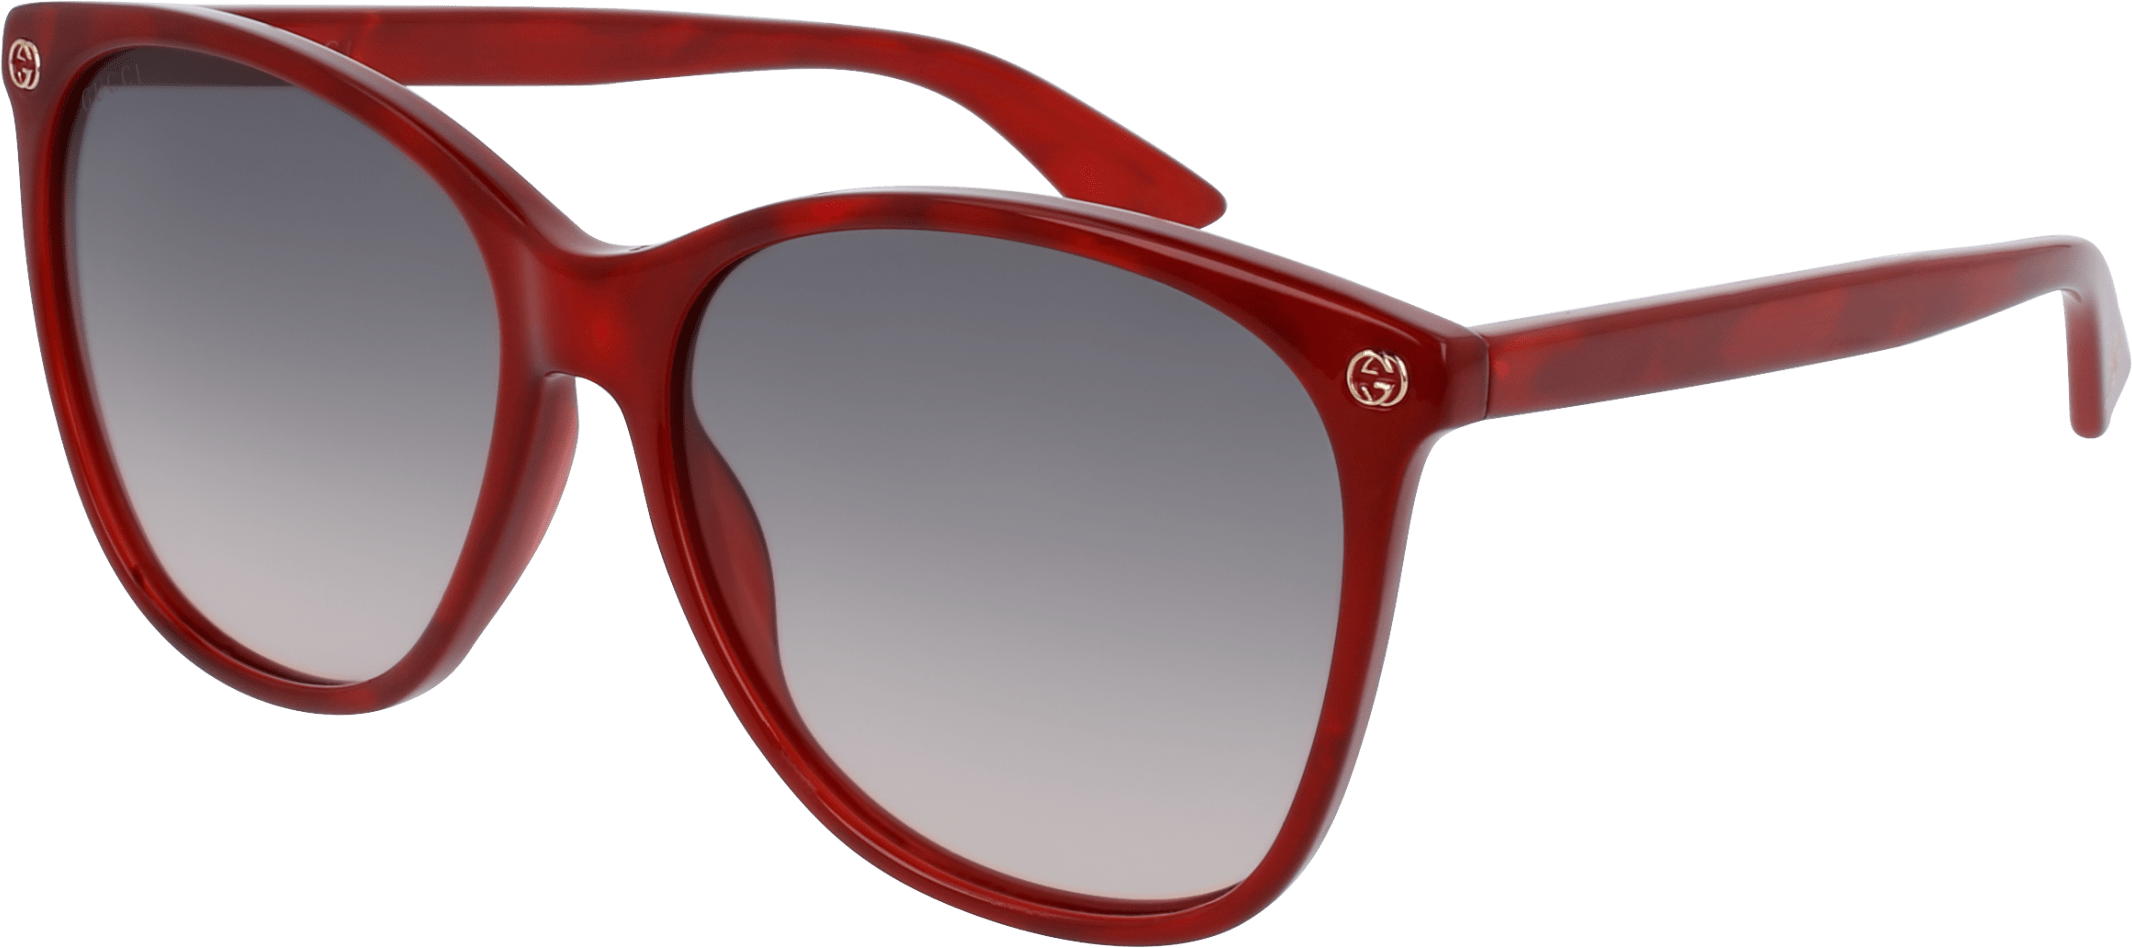 Color_GG0024S-006 - RED - BROWN - GRADIENT